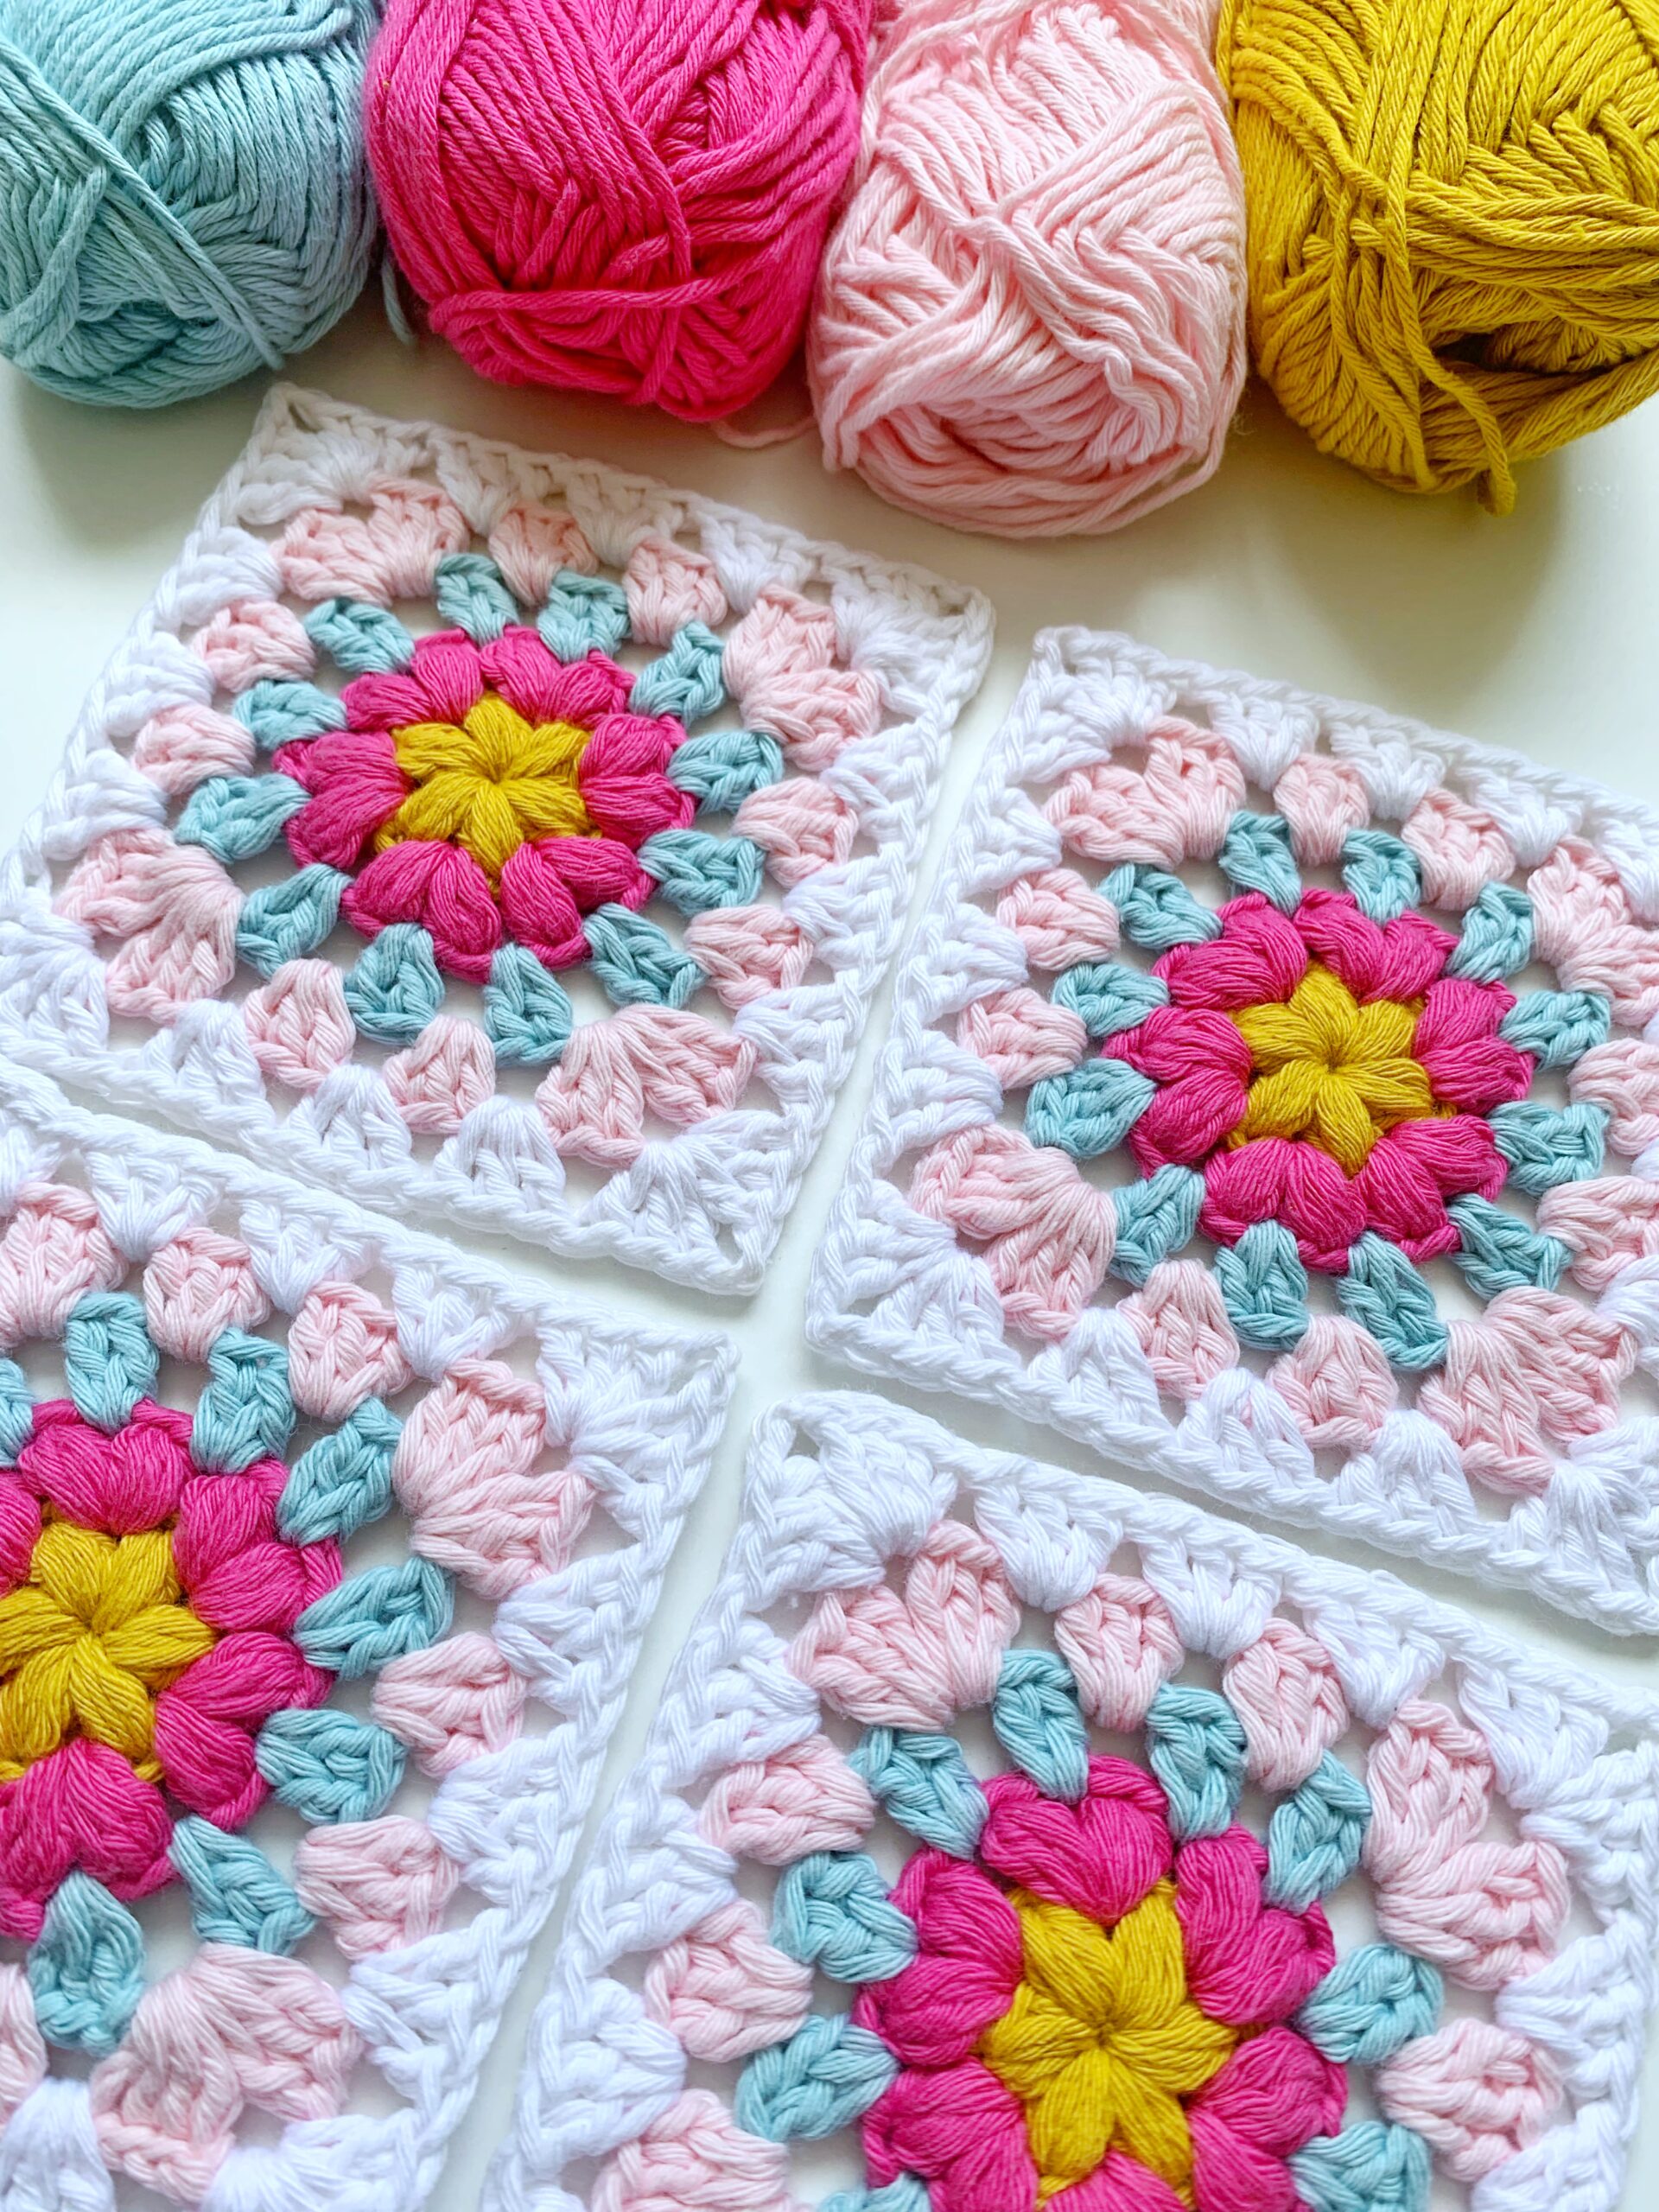 Different Granny Square Patterns